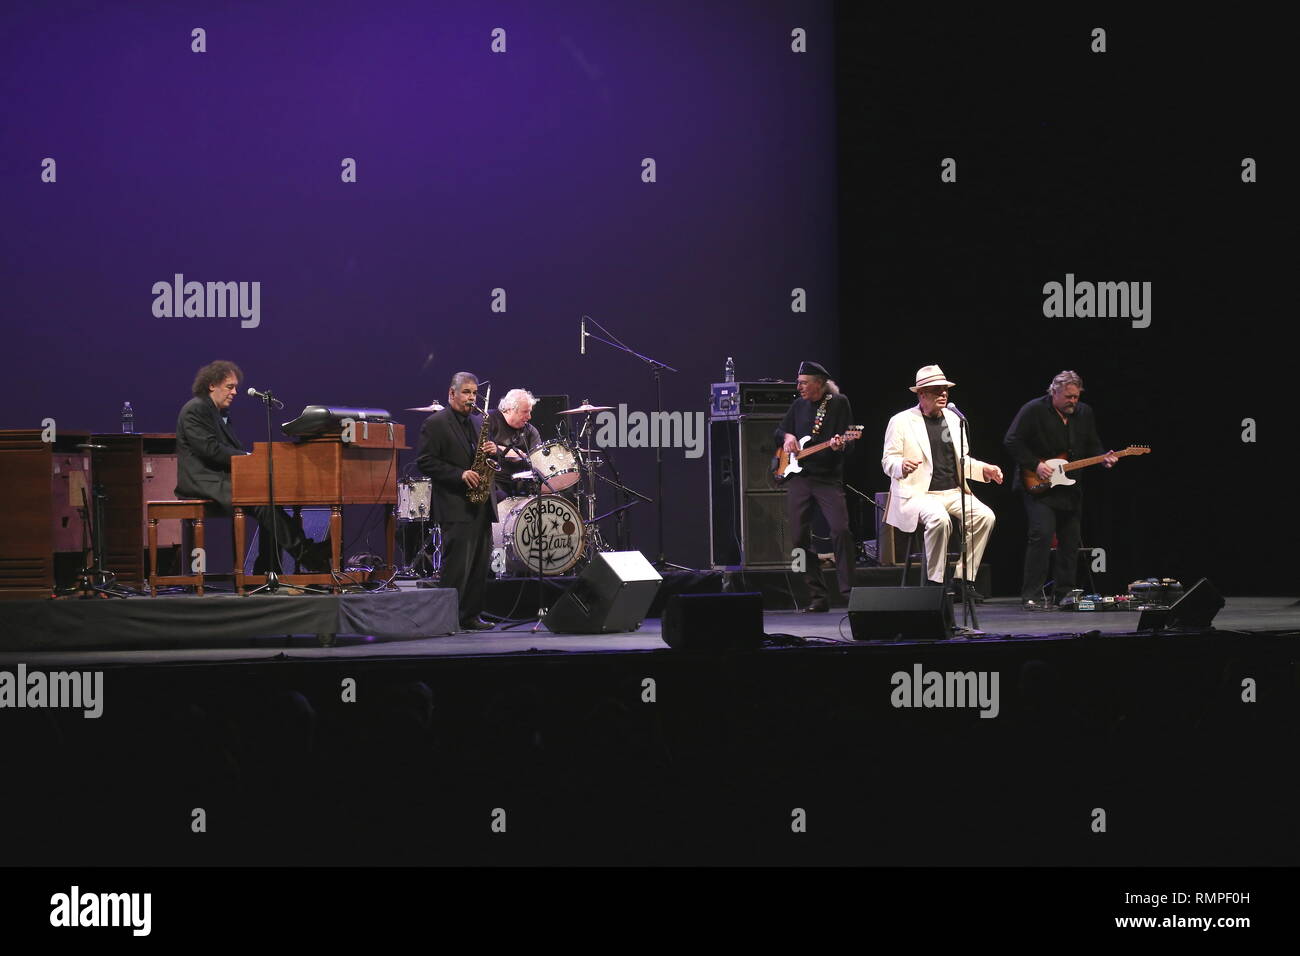 Singer and band leader Lefty Foster is shown performing with the Shaboo All Stars during a 'live' concert appearance. Stock Photo